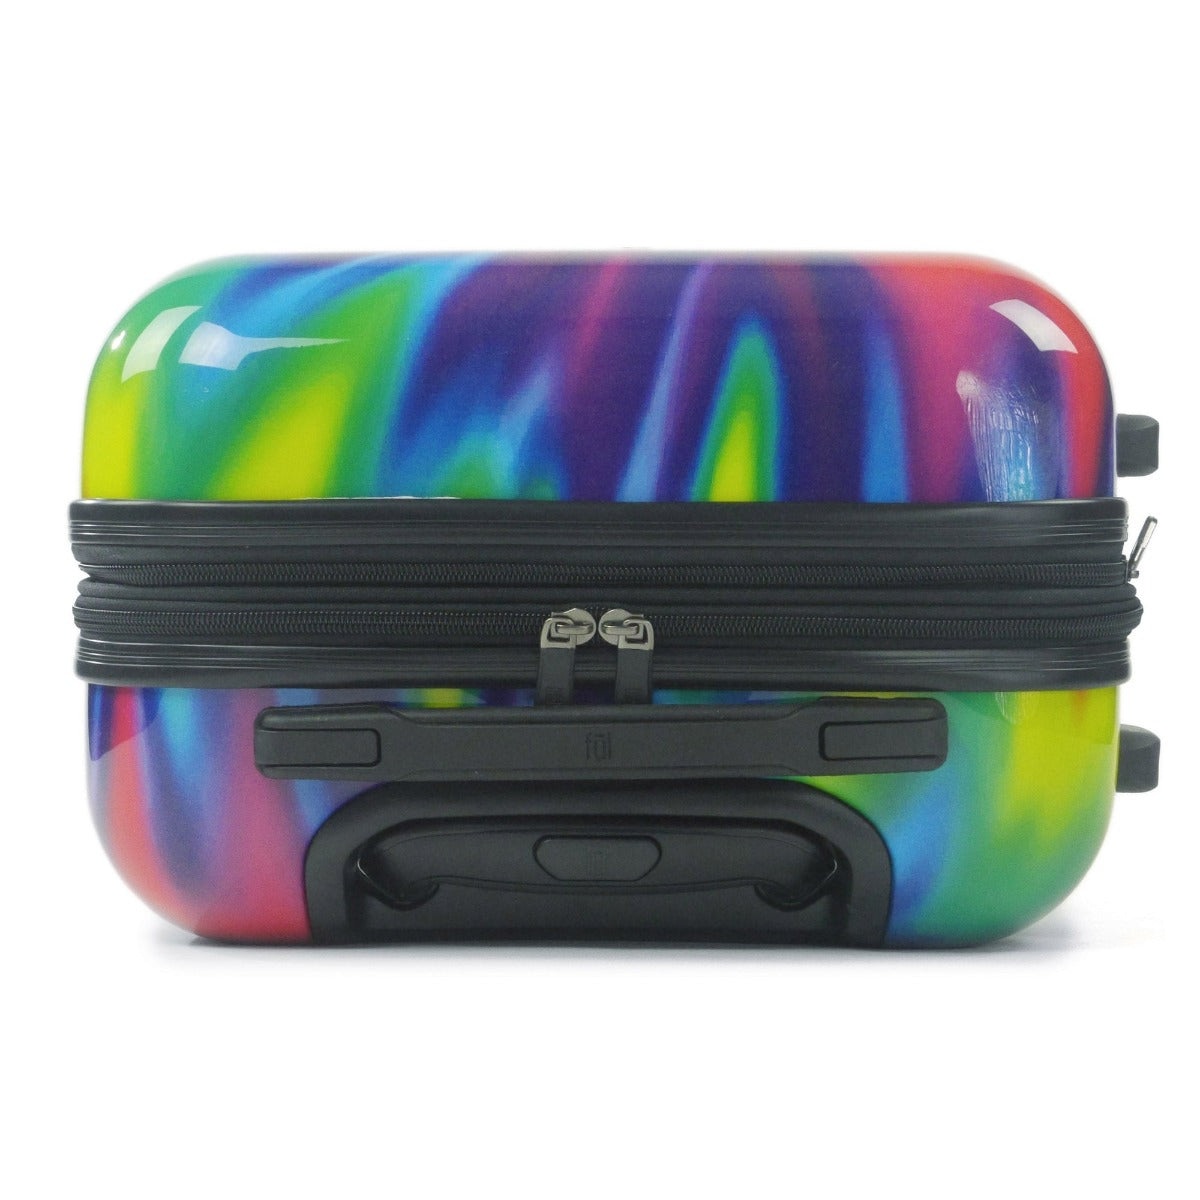 Ful Hard sided Tie dye rainbow swirl 28" spinner rolling suitcase checked luggage